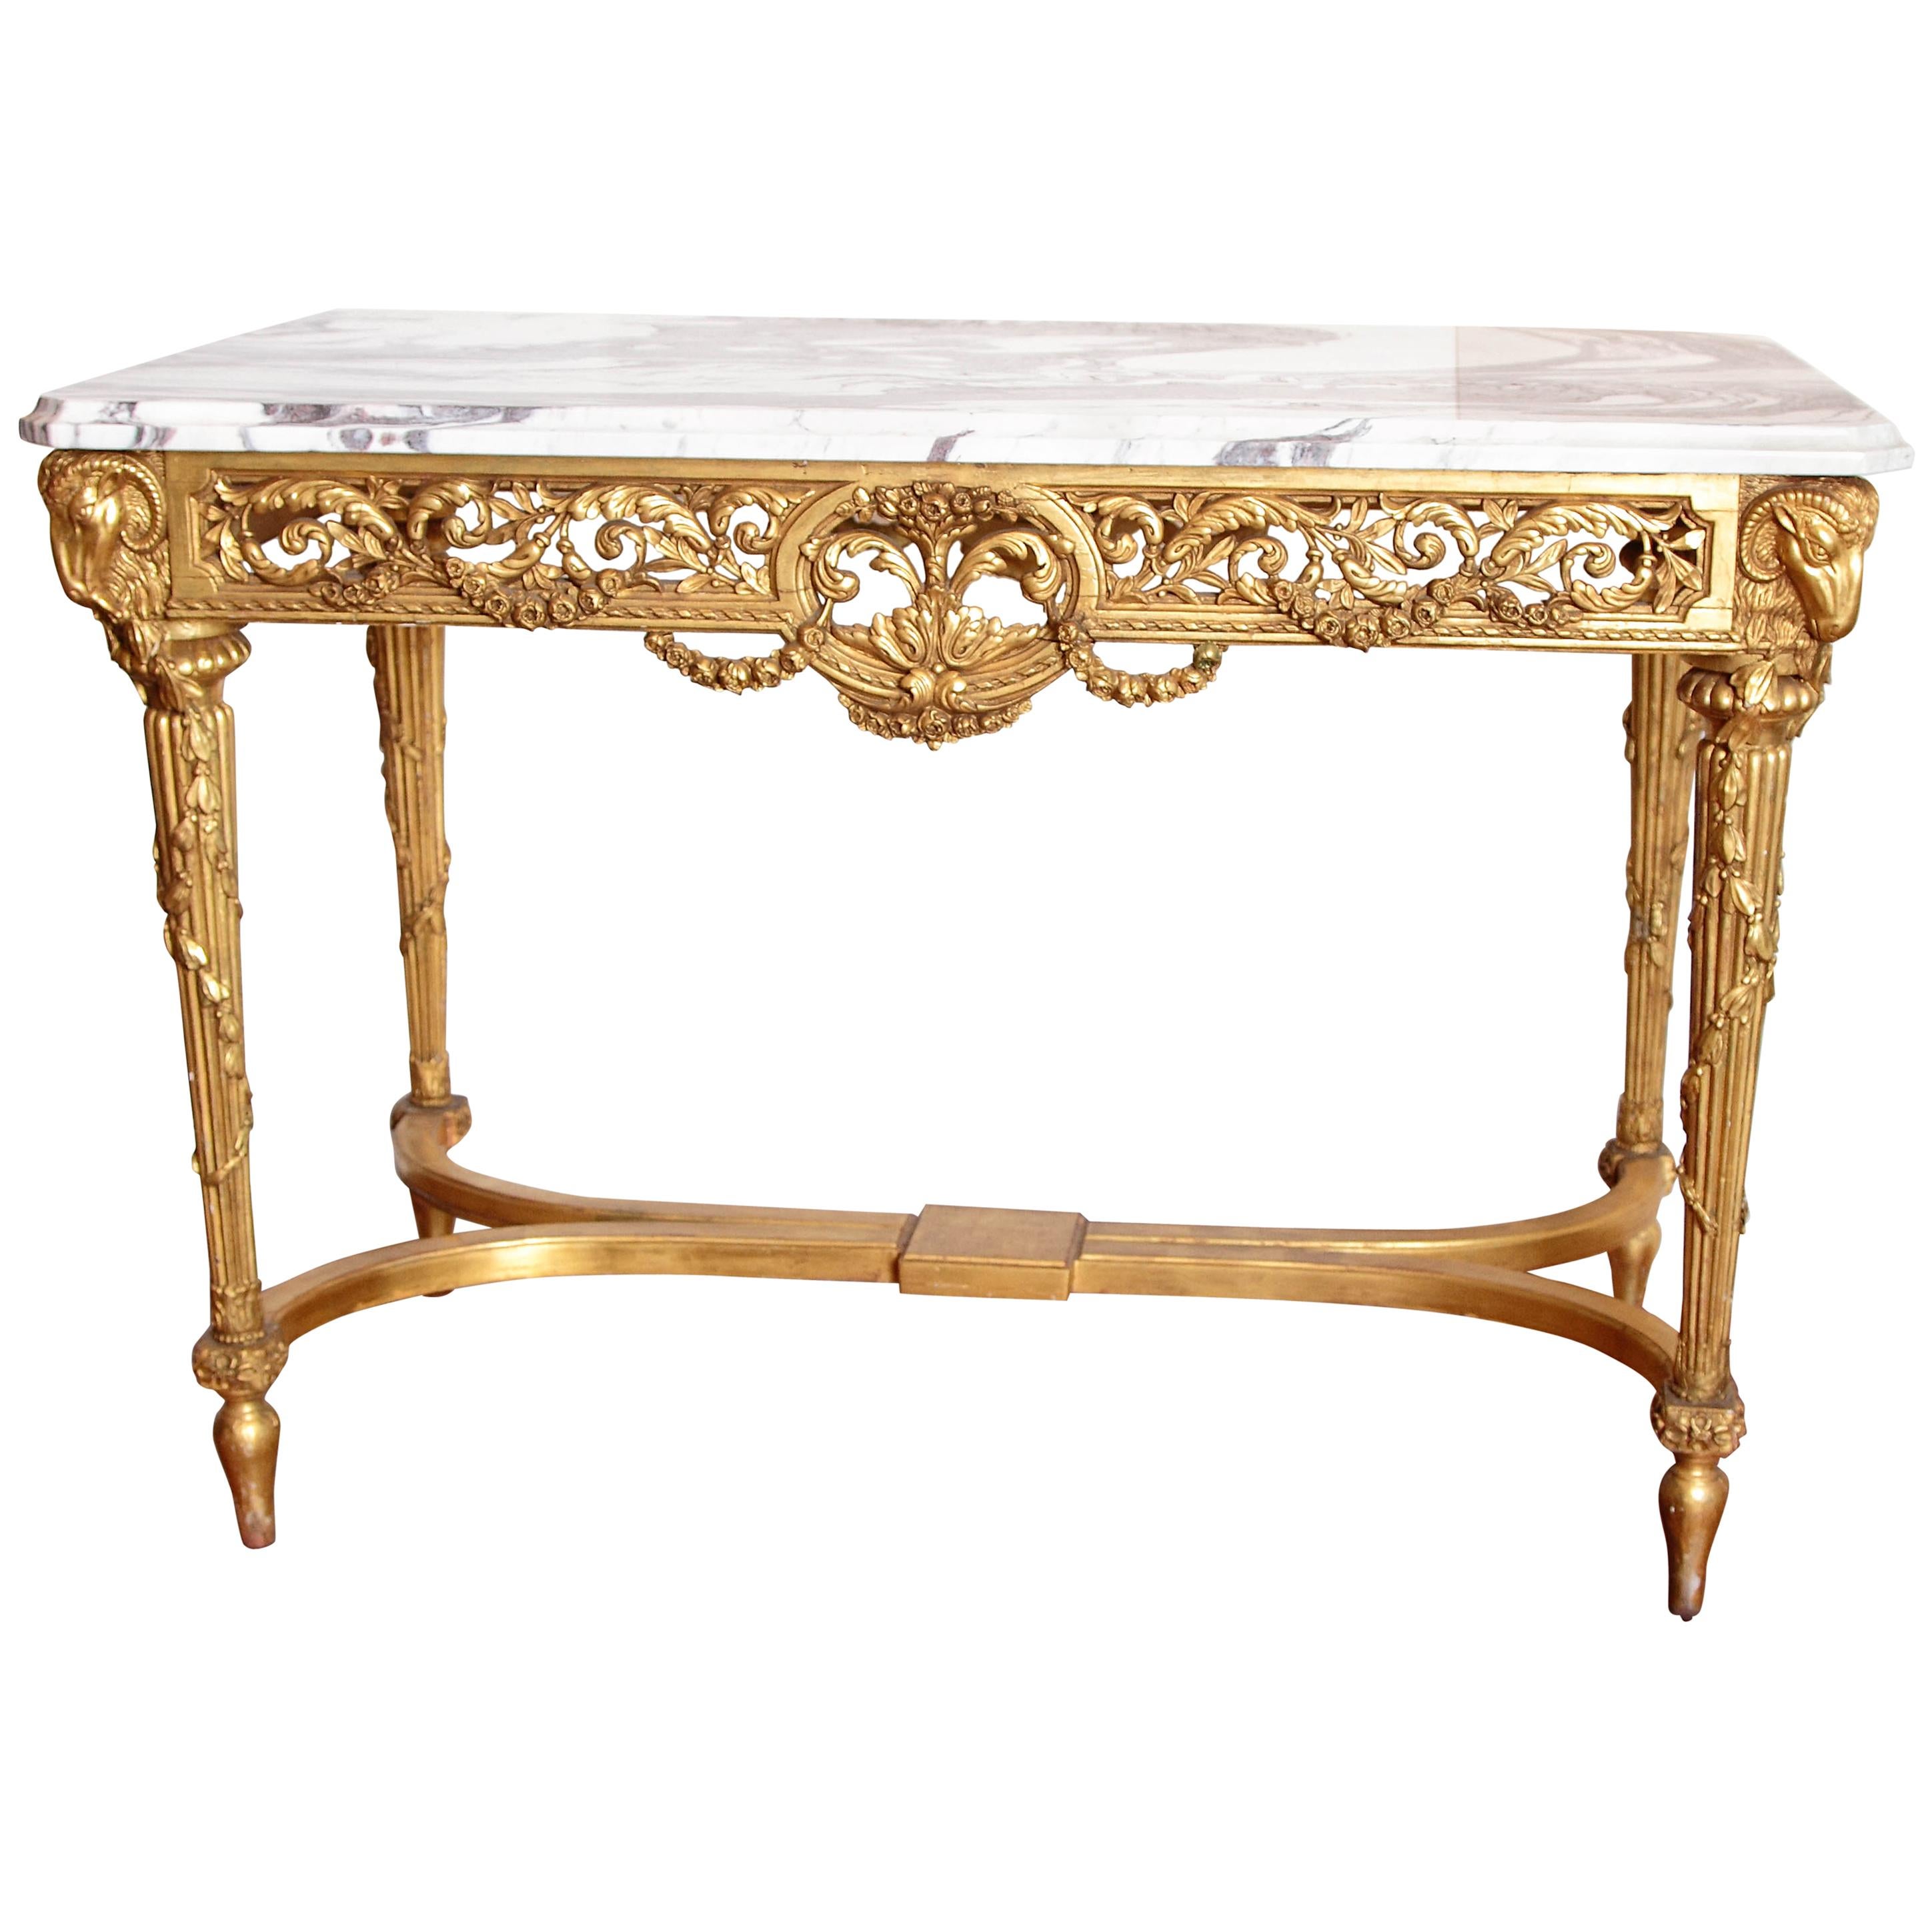 19th Century French Louis XVI Gilt Carved Salon Table For Sale